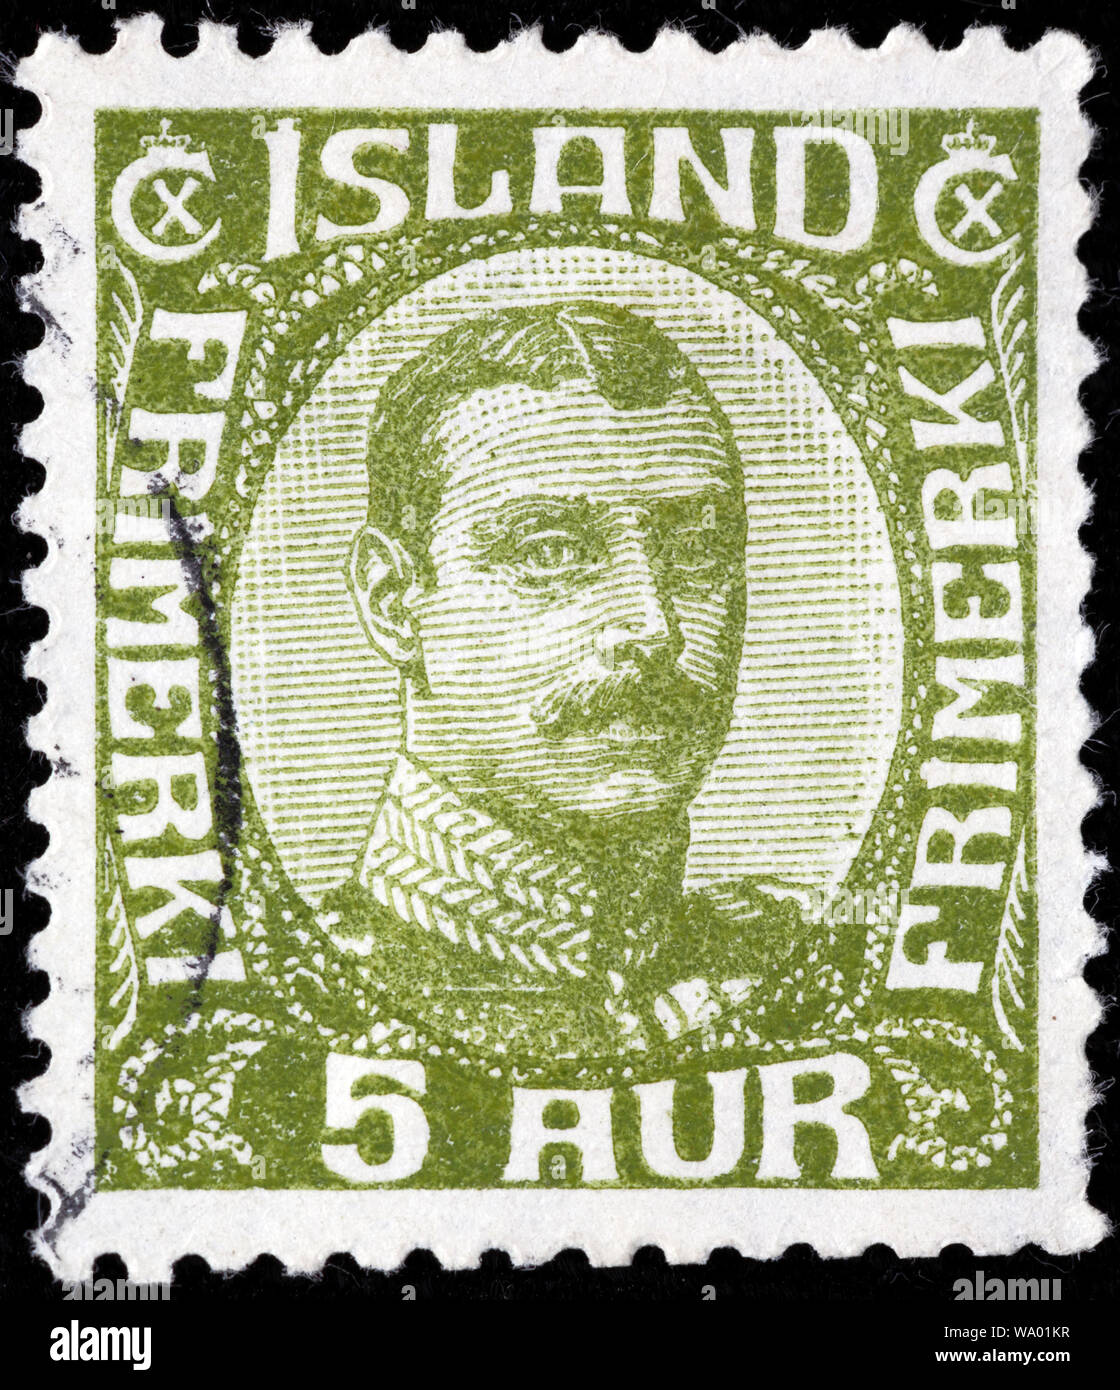 Christian X, King of Denmark and Iceland (1912-1947), postage stamp, Iceland, 1920 Stock Photo